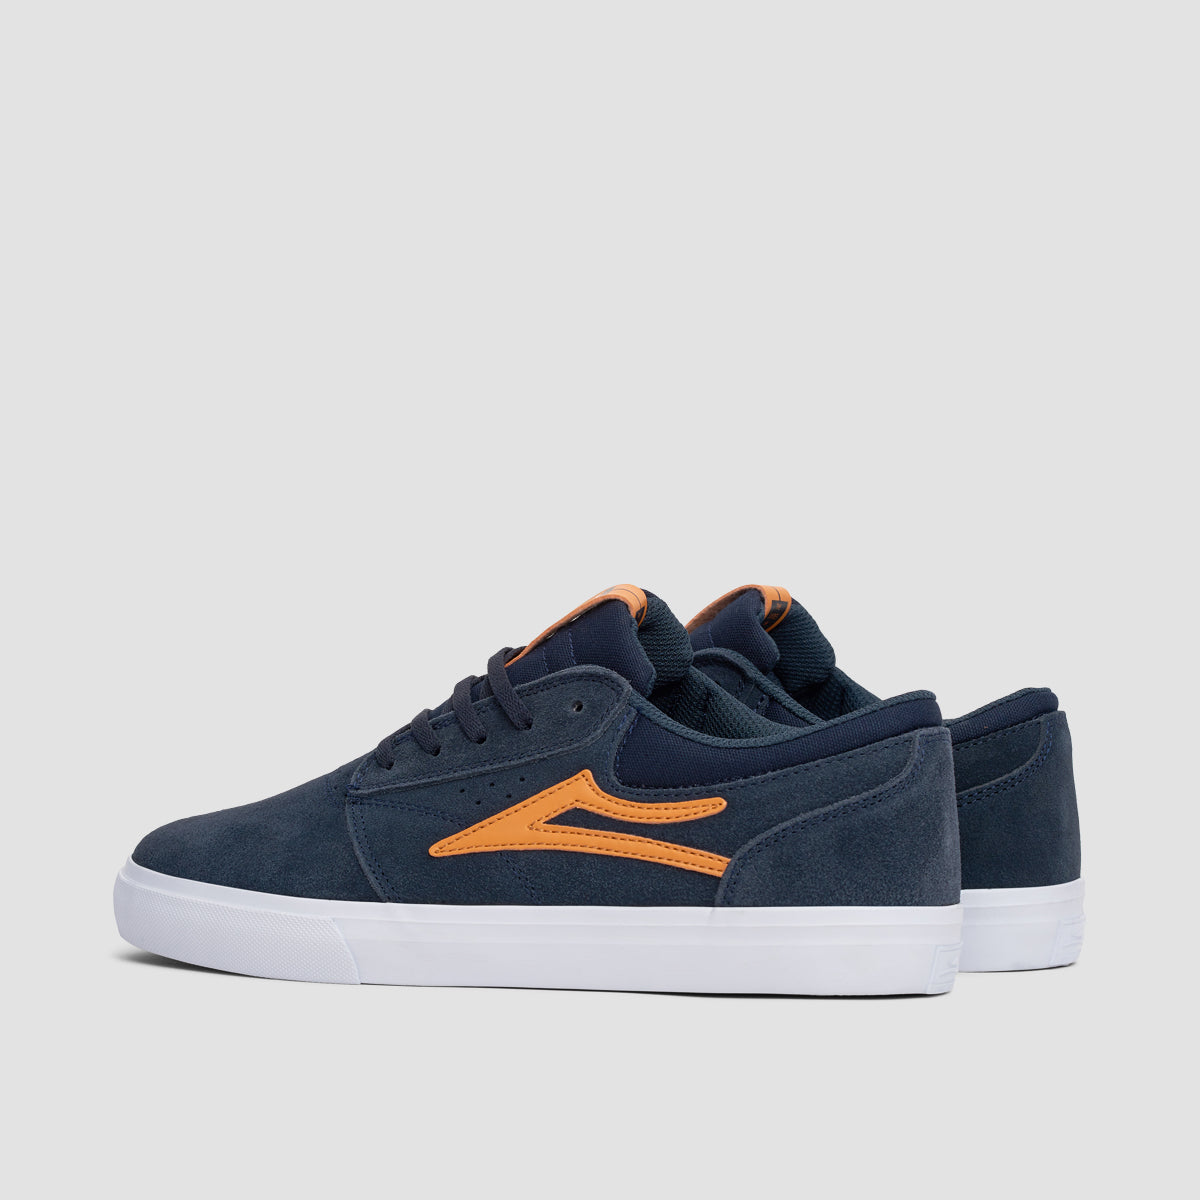 Lakai Griffin Shoes - Midnight Suede